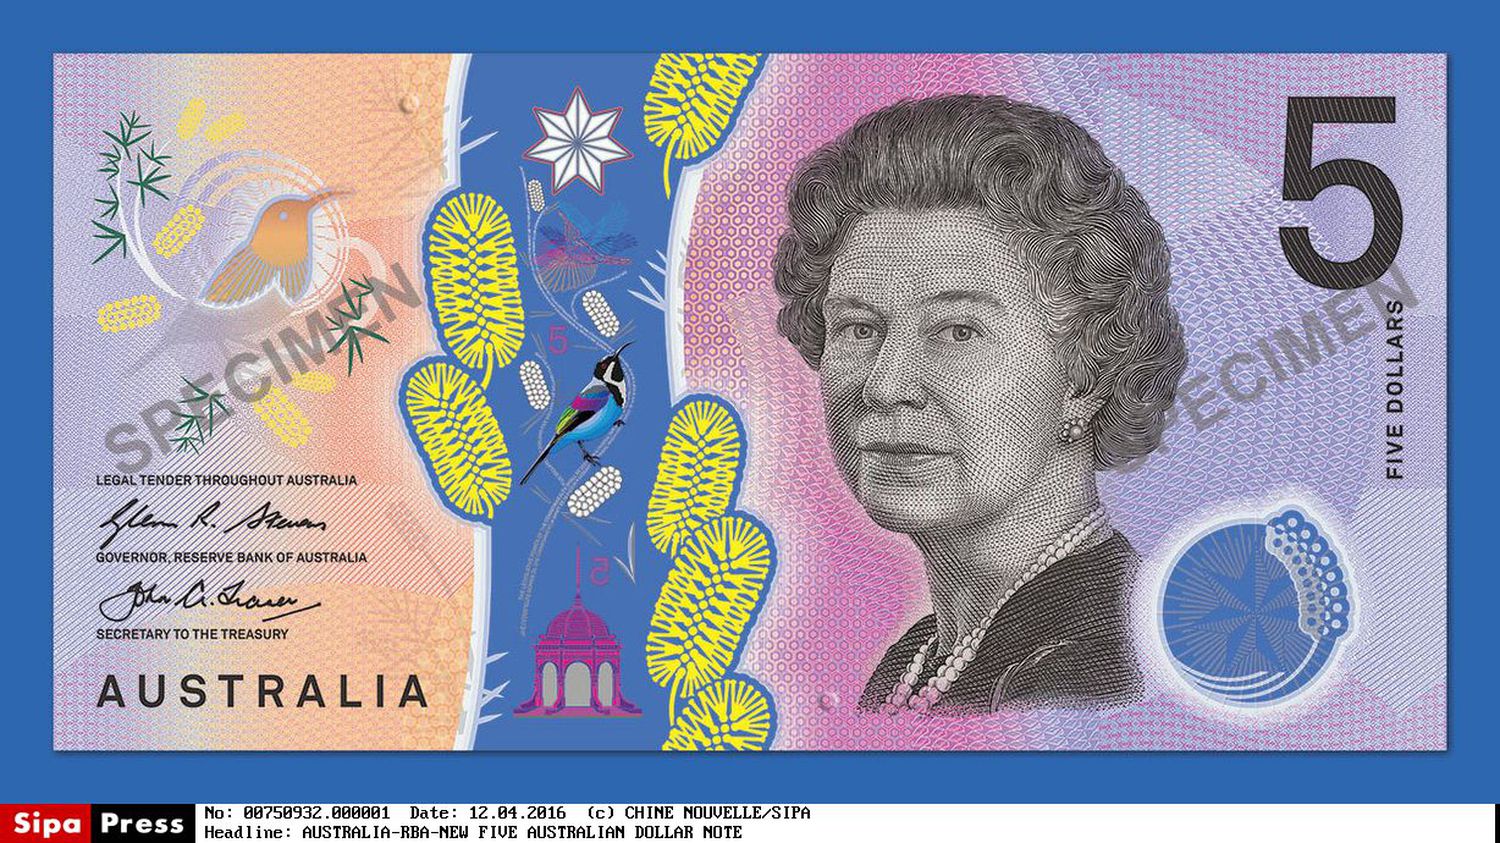 Australia: King Charles III will not have his effigy on banknotes
